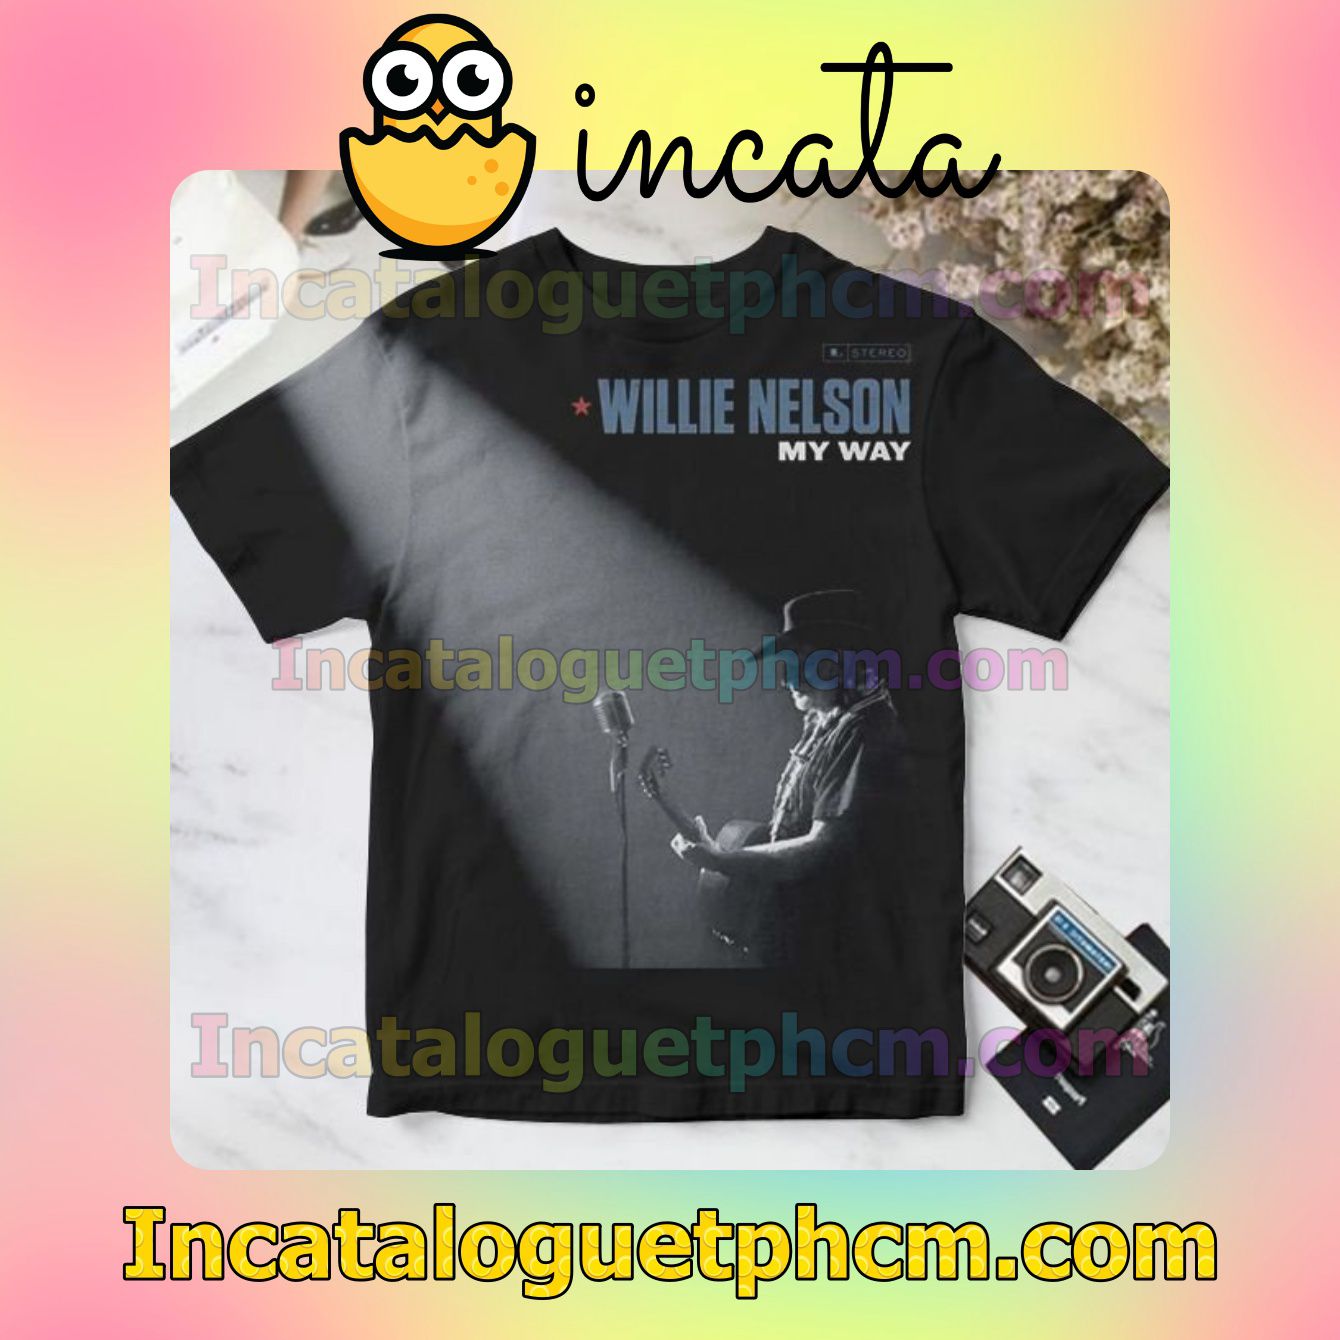 Willie Nelson My Way Album Cover Personalized Shirt